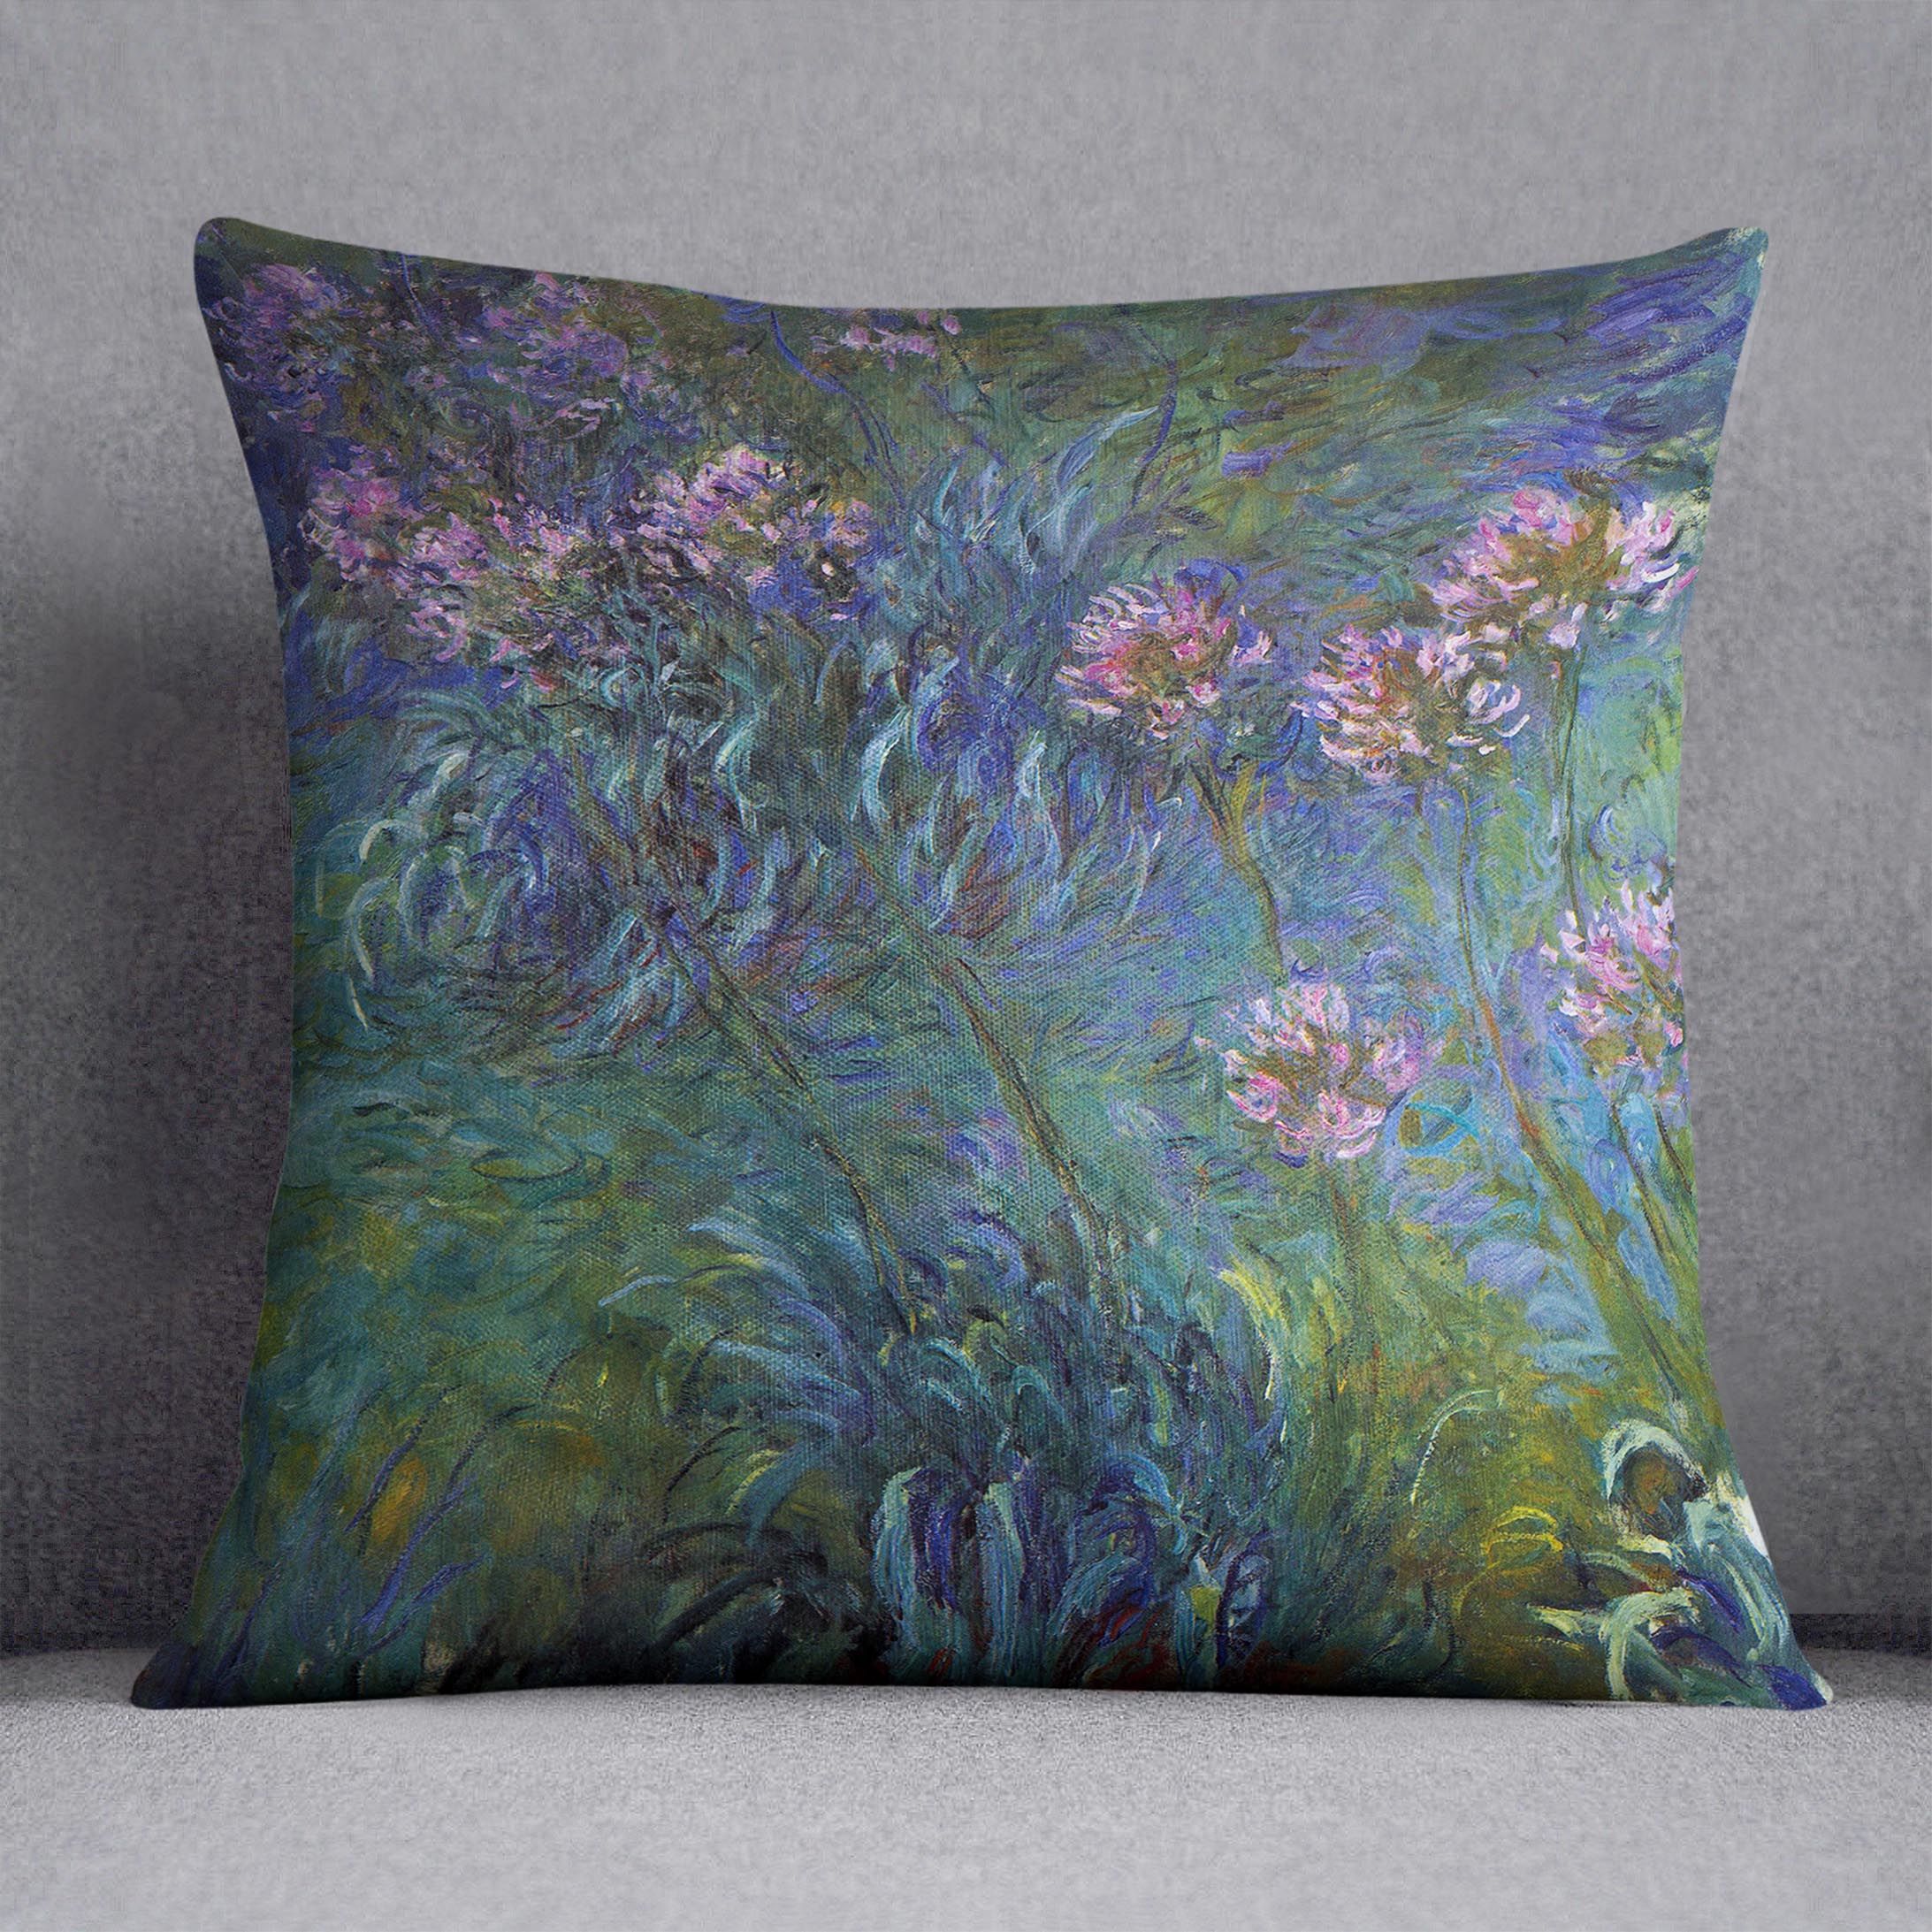 Jewelry lilies by Monet Cushion